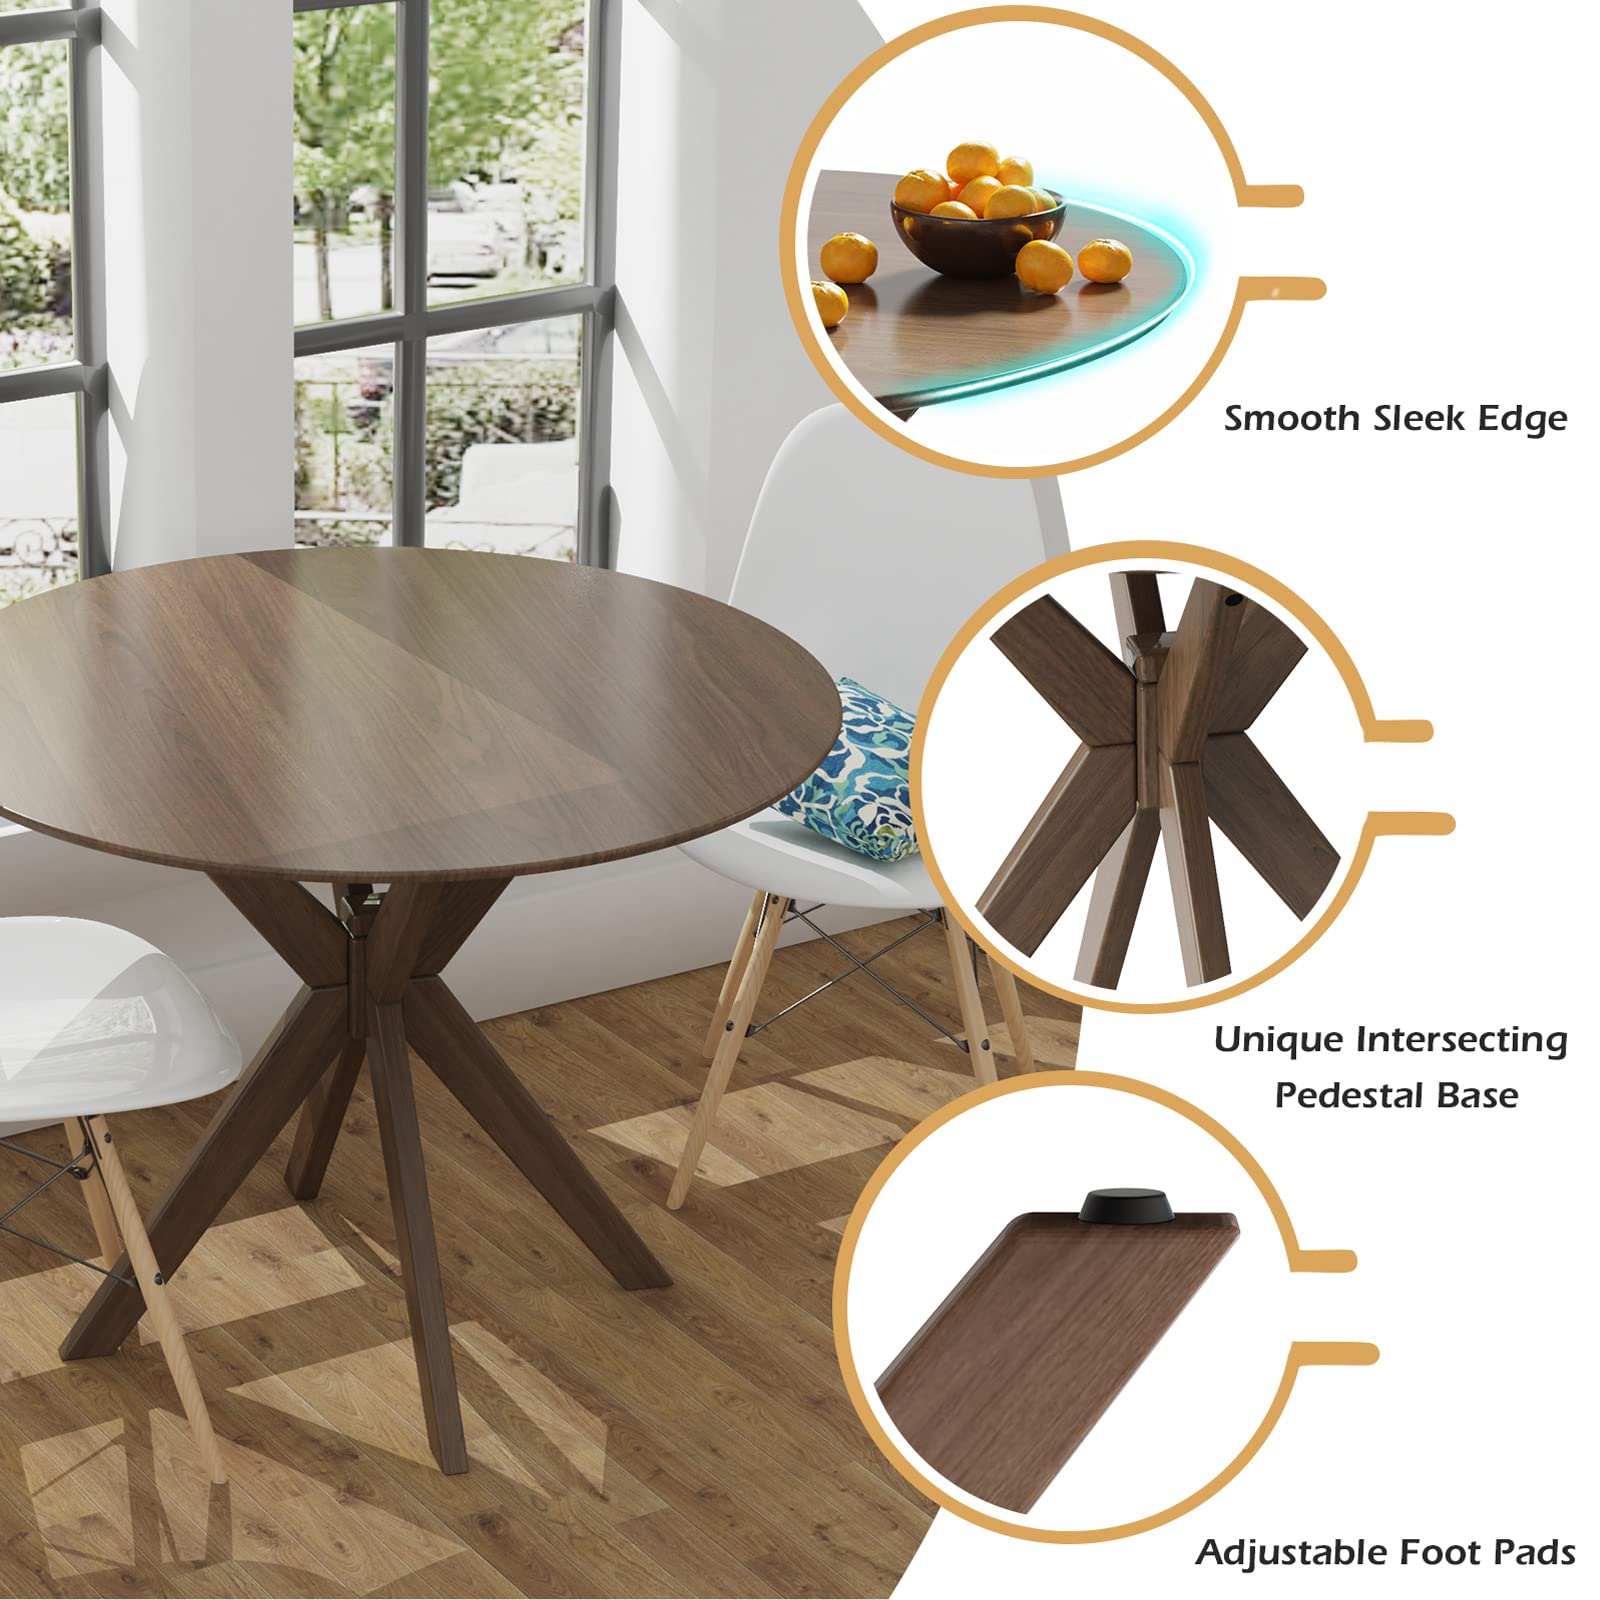 Giantex 36 Inch Round Wood Dining Table, Farmhouse Kitchen Table with Intersecting Pedestal Base & Adjustable Foot Pads